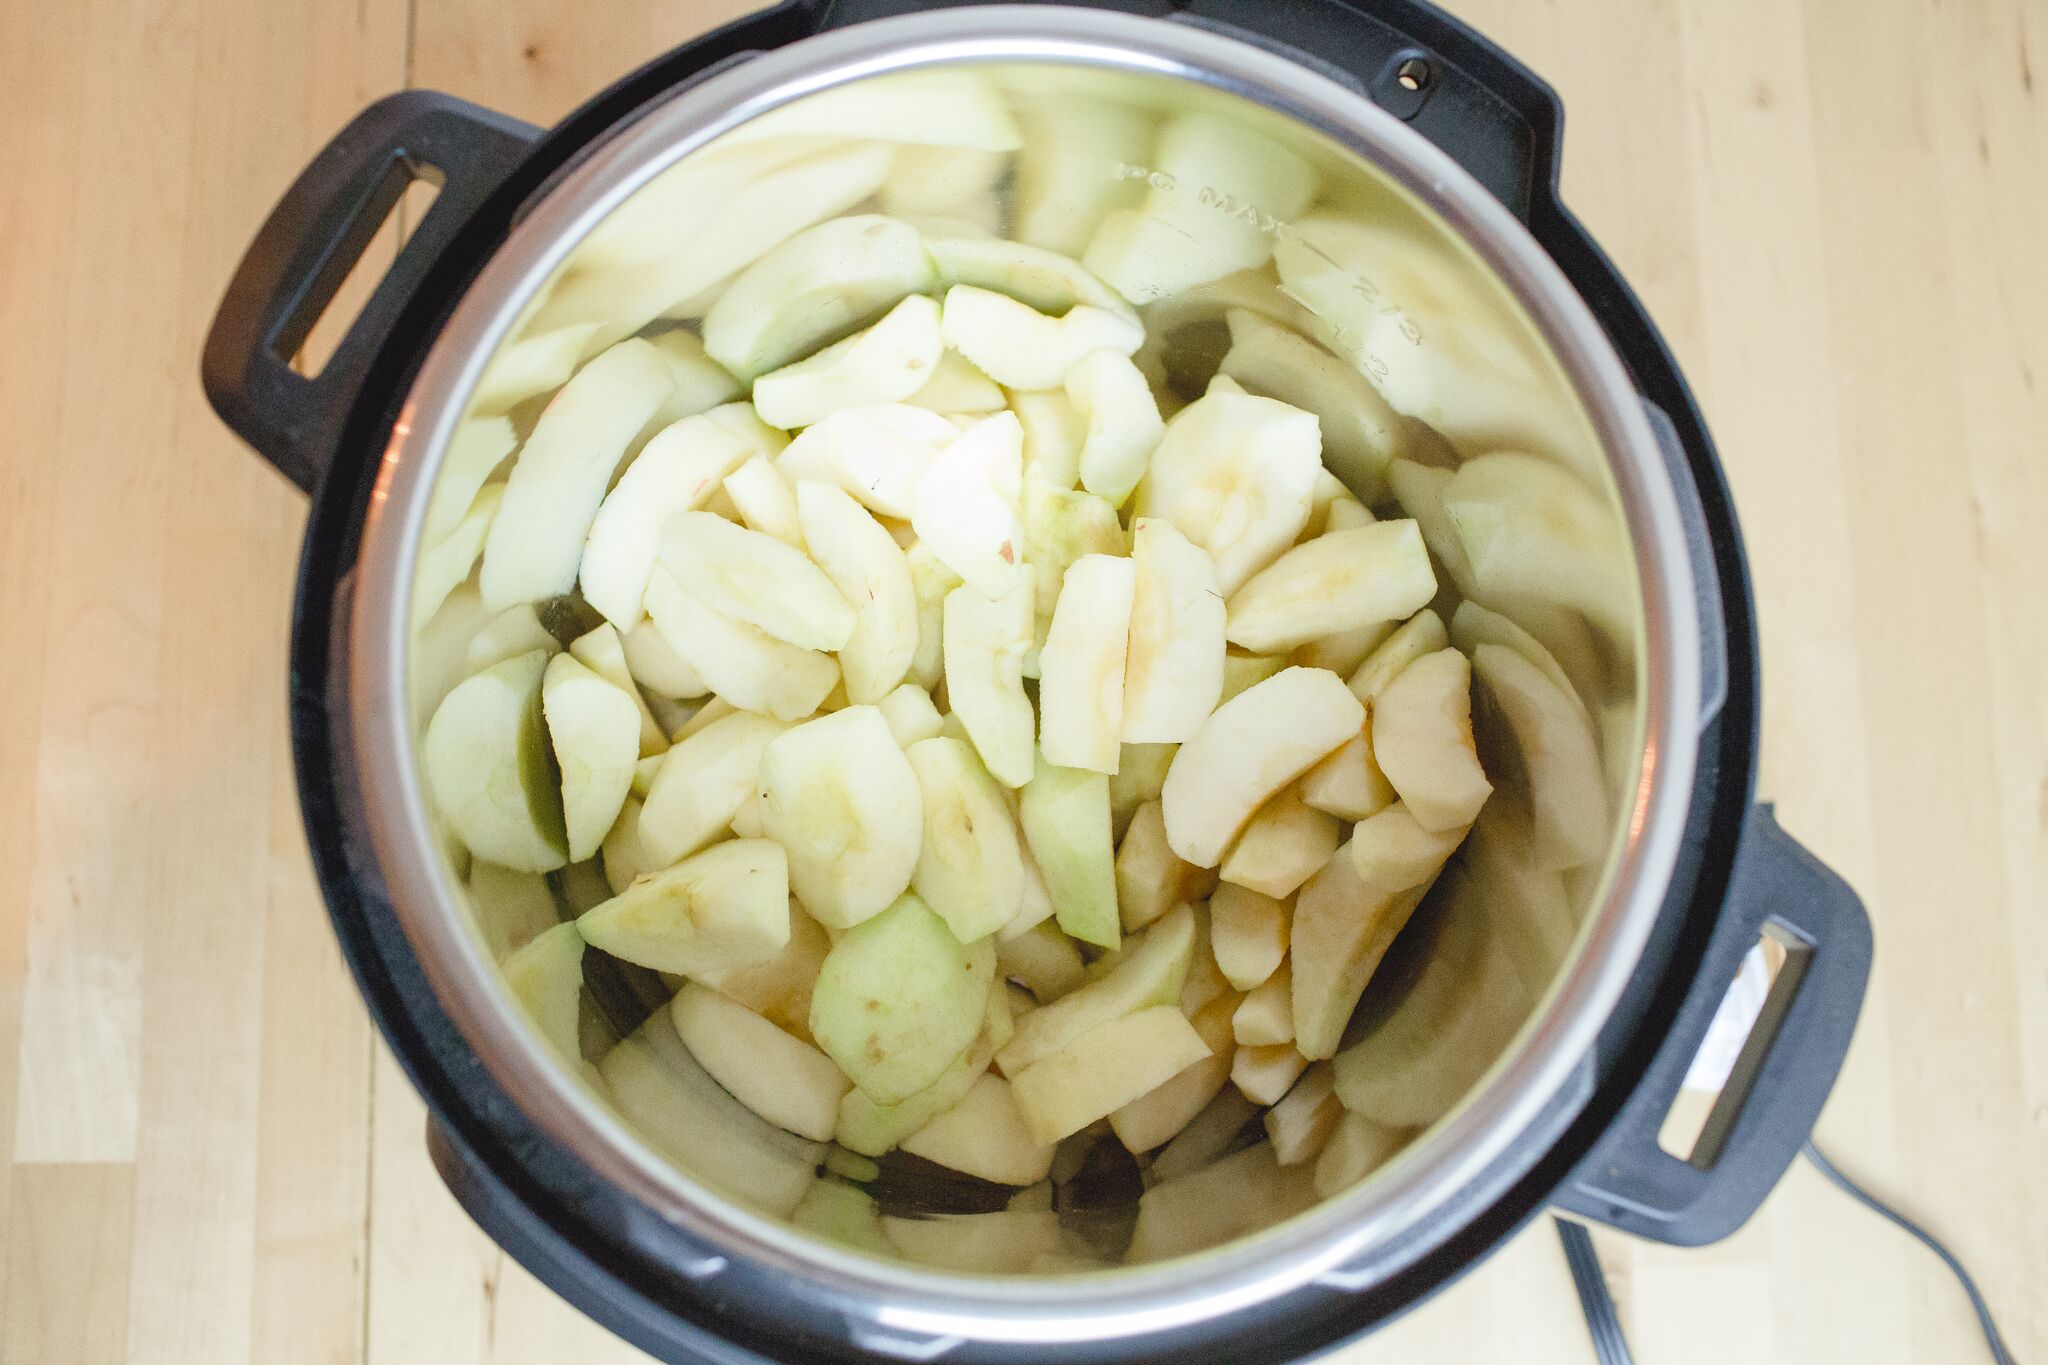 Wash, peel and core apples, then add apples to the Instant Pot.